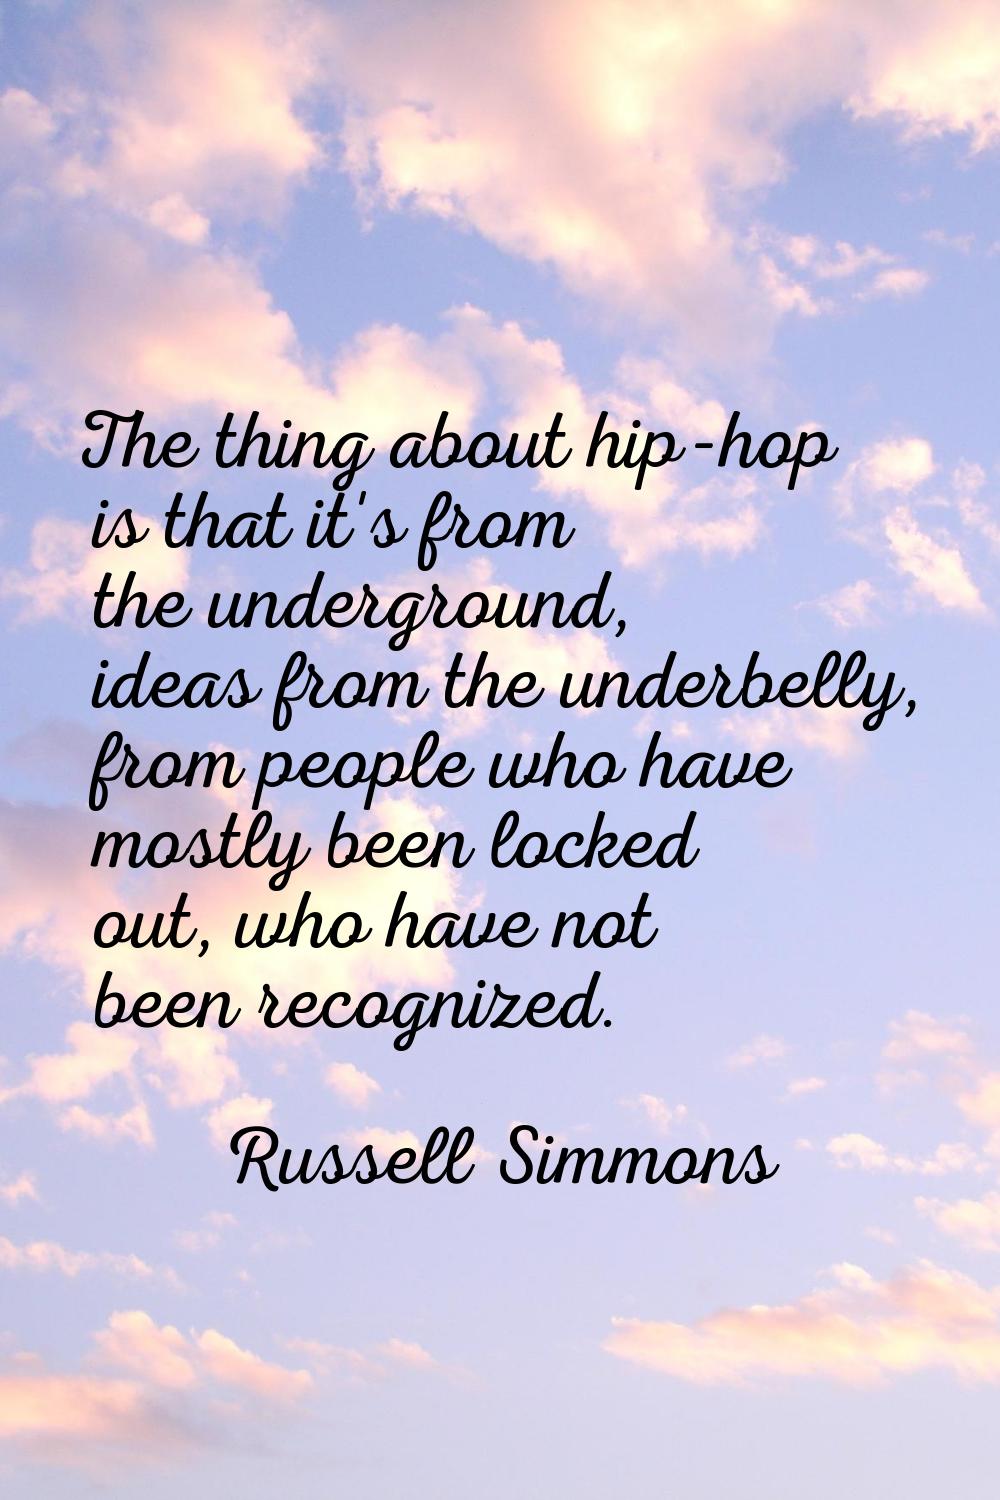 The thing about hip-hop is that it's from the underground, ideas from the underbelly, from people w